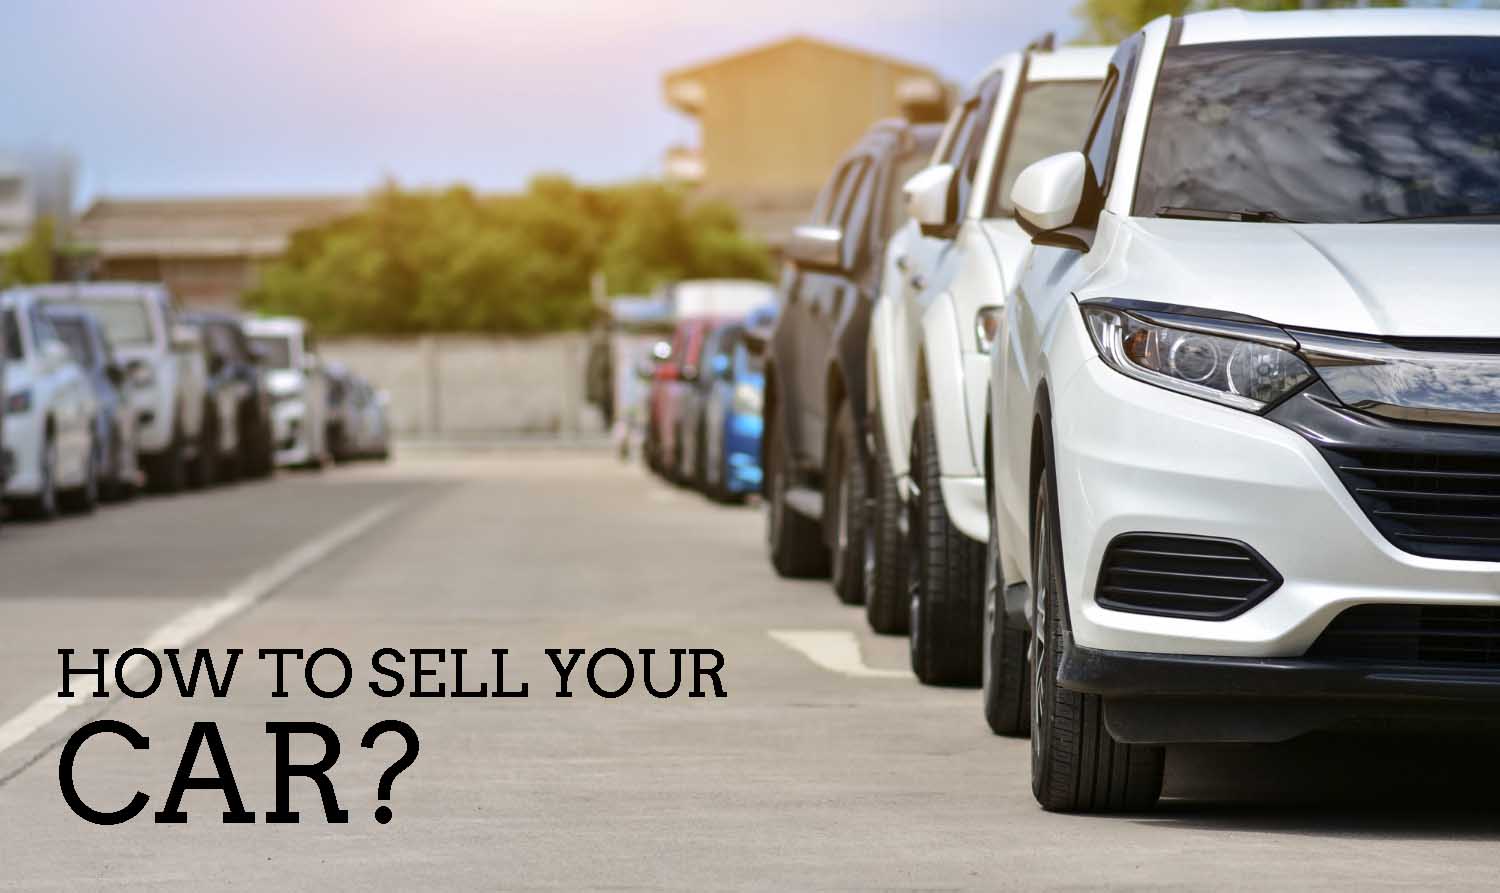 How To Sell Your Car?